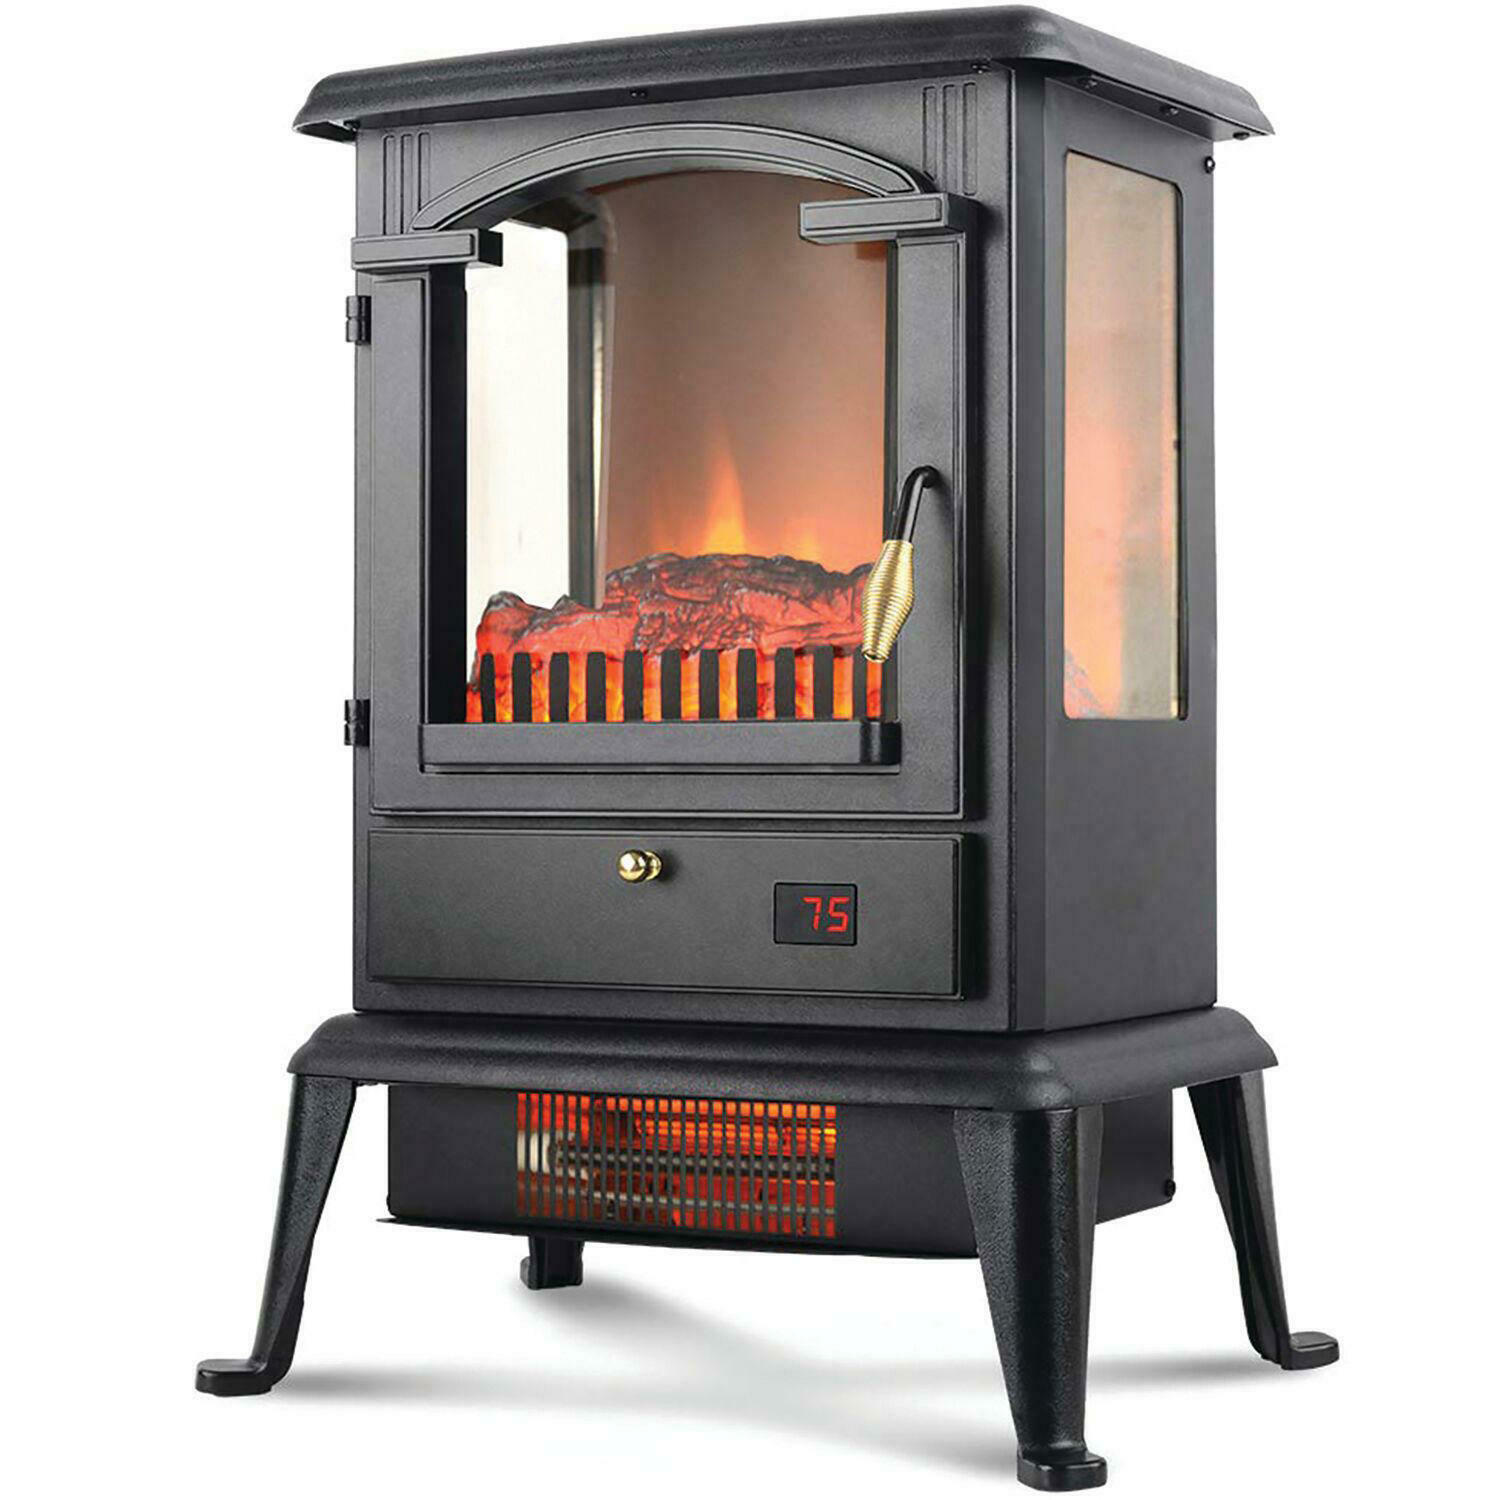 Warm-living 1,500w 17" Freestanding Infrared Stove Heater With Remote